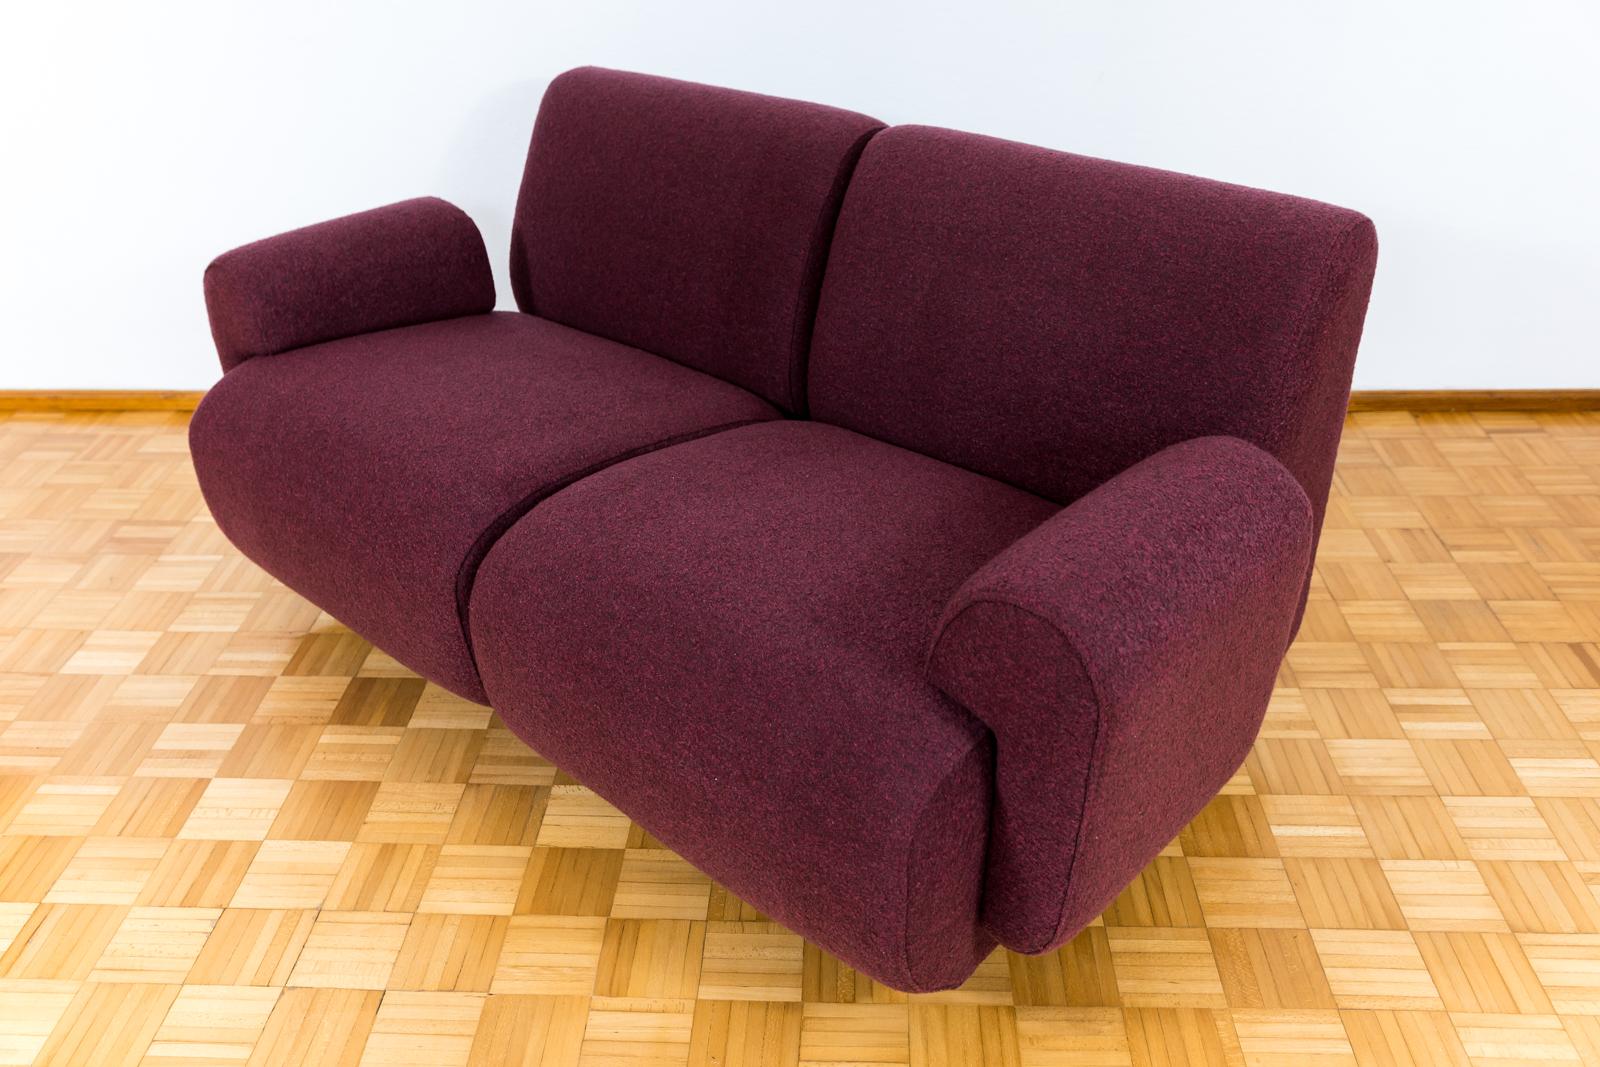 Pair Of Purple Modular Lounge Chairs, 1970, Germany For Sale 7